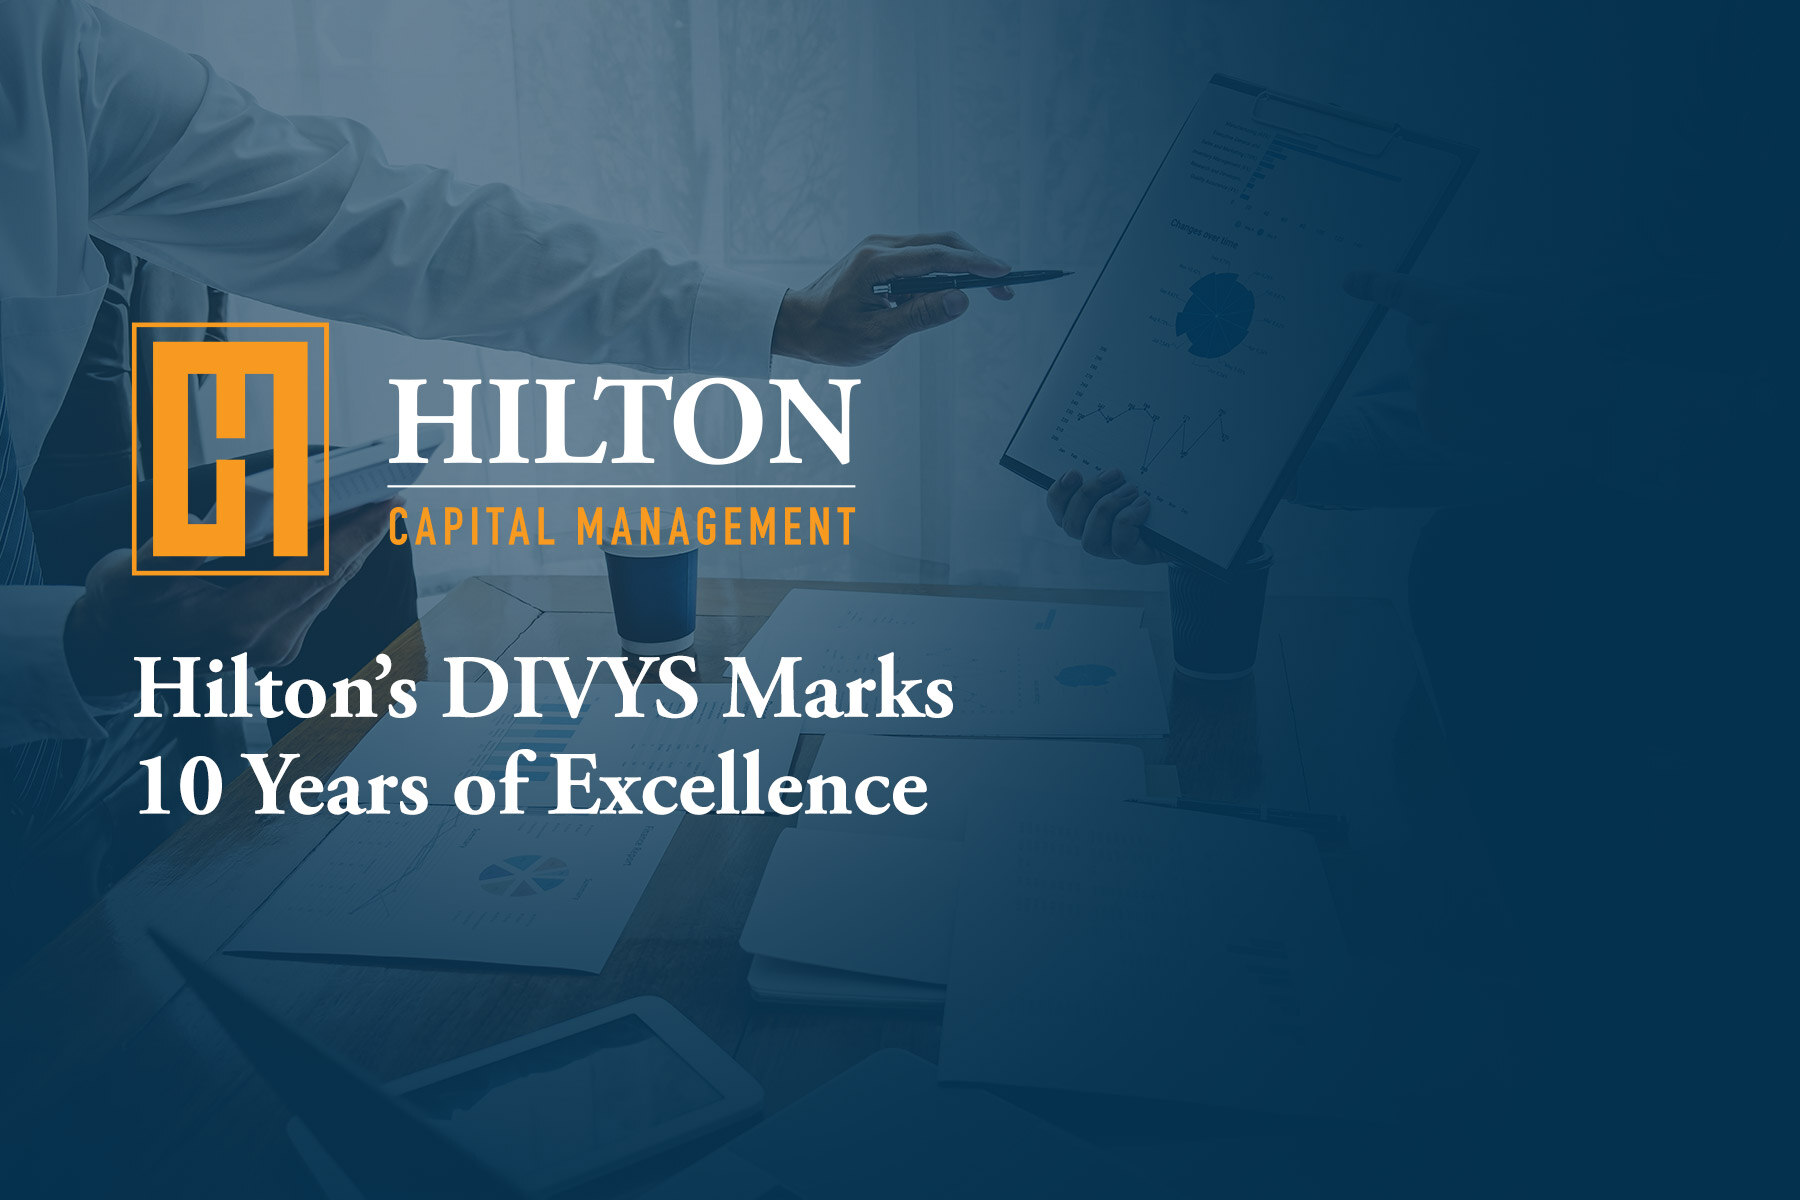 Hilton’s DIVYS Marks 10 Years of Excellence